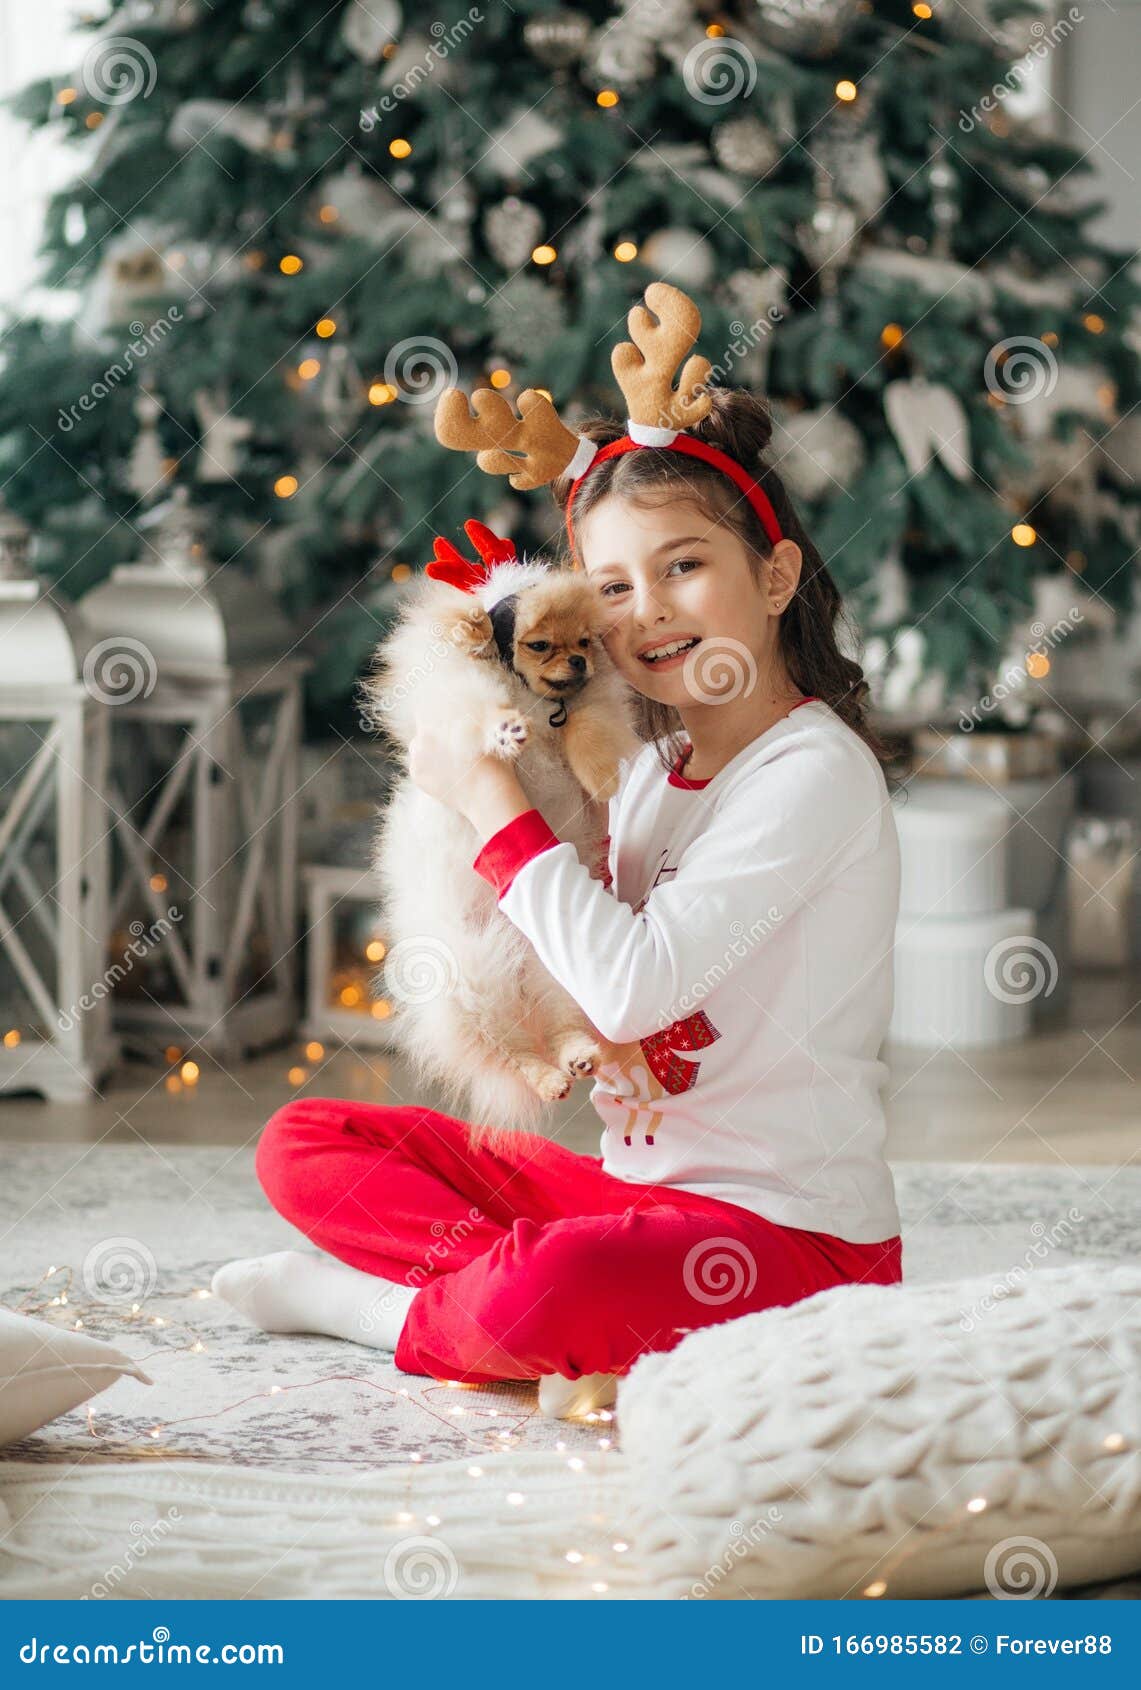 Happy Little Girl with Dog in Christmas Decorations Stock Photo - Image ...